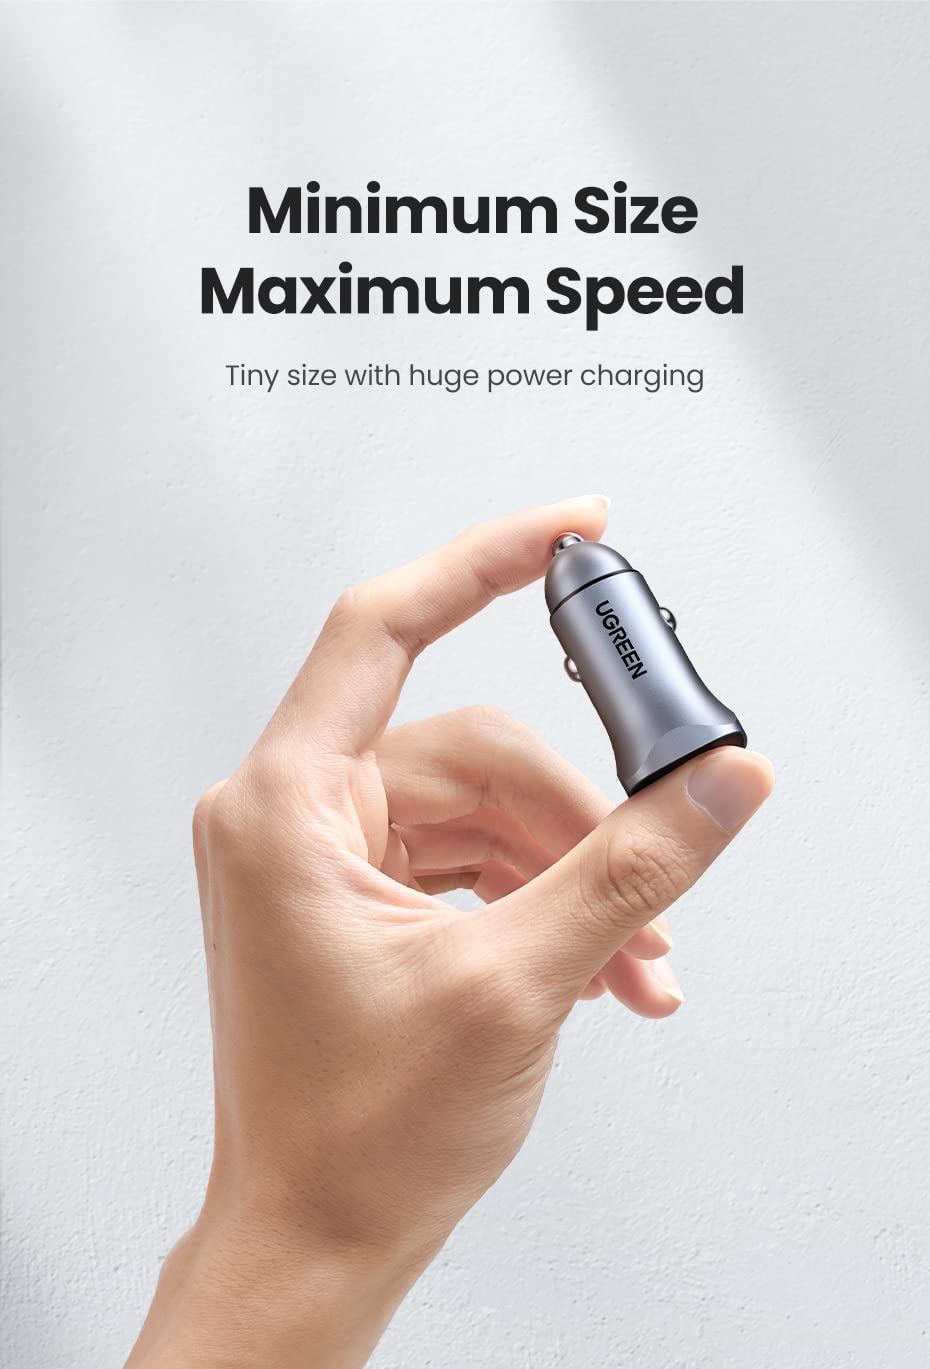 UGREEN 24W PD Dual USB Port Fast Car Charger Adapter Compatible with Mobile Devices, Tablets, Dash Camera (Space Gray) | 30780